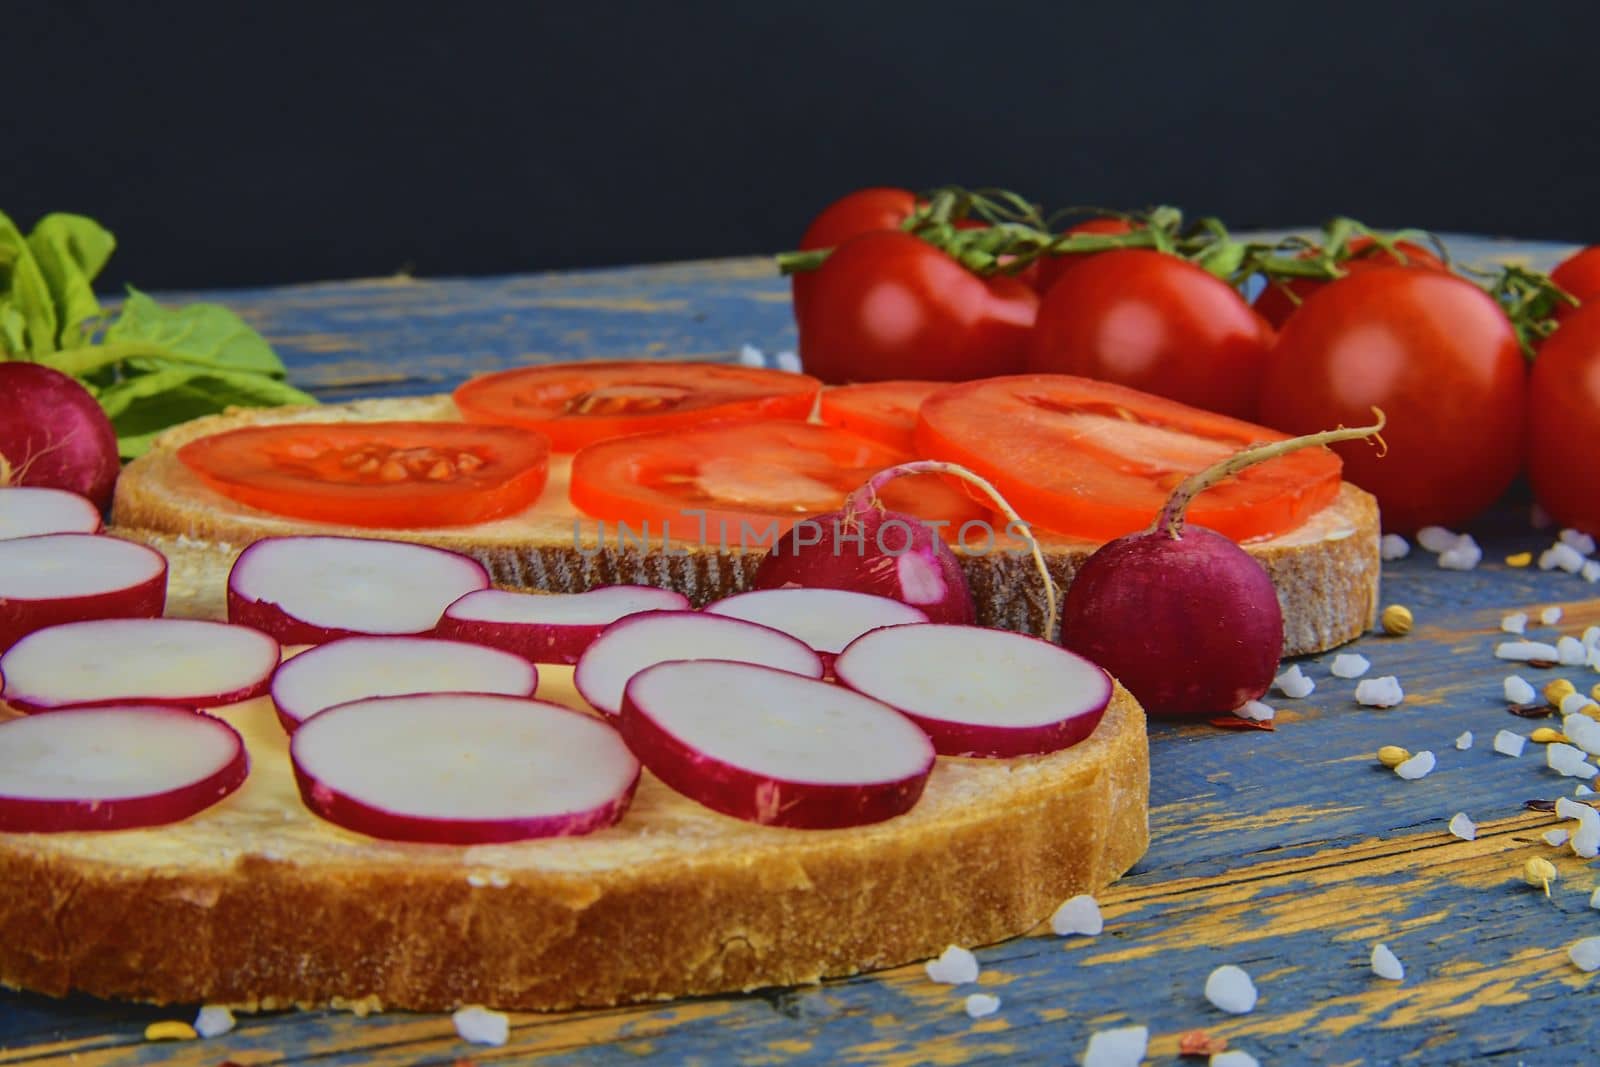 Spread butter on bread with sliced tomatoes and radishes. Fresh snack on natural wooden background by roman_nerud